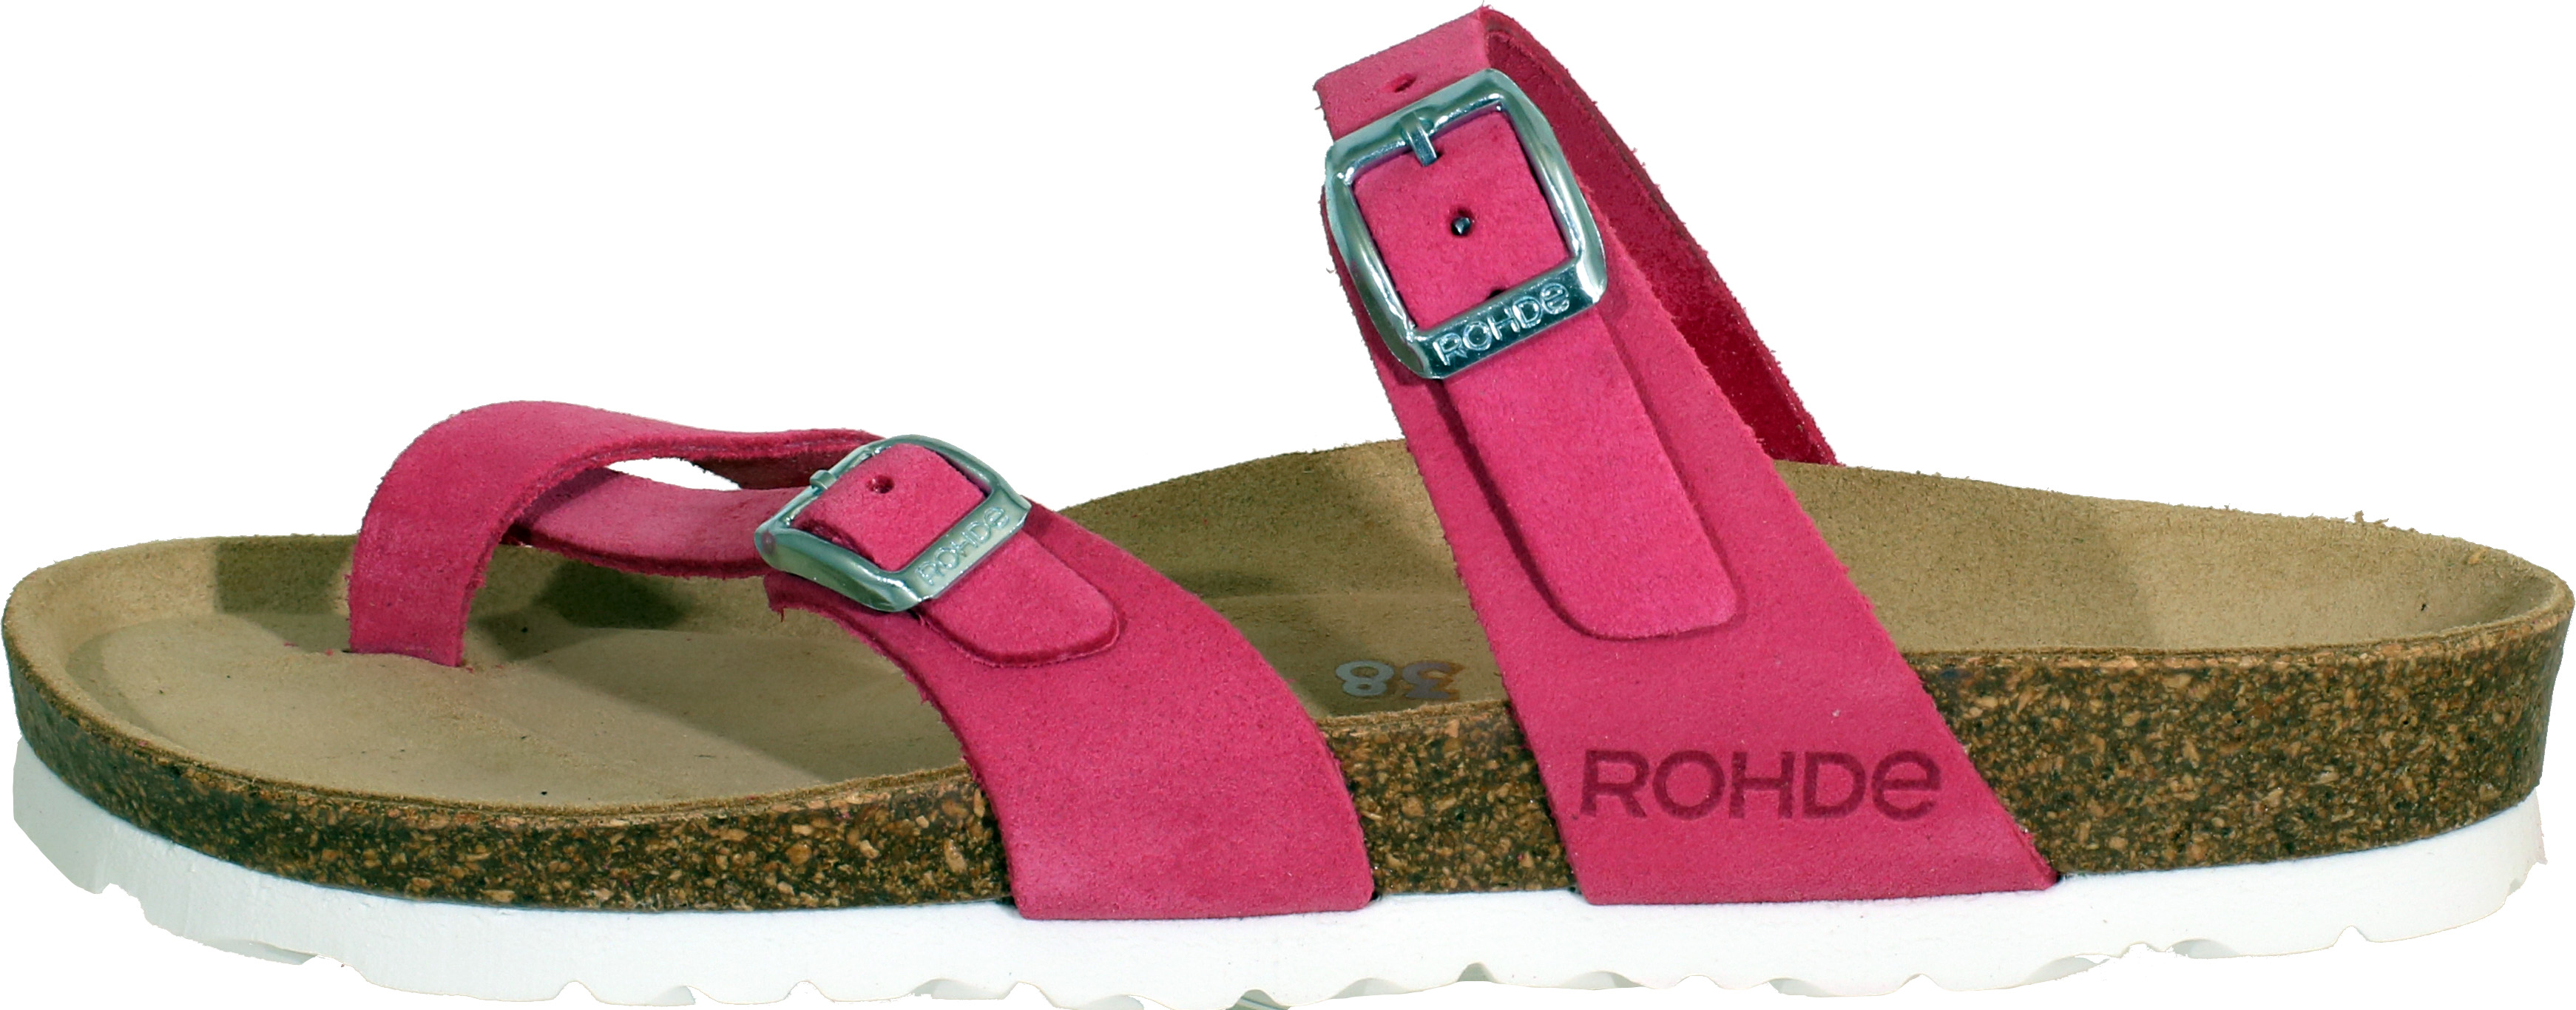 Rohde Alba - Pink Leather